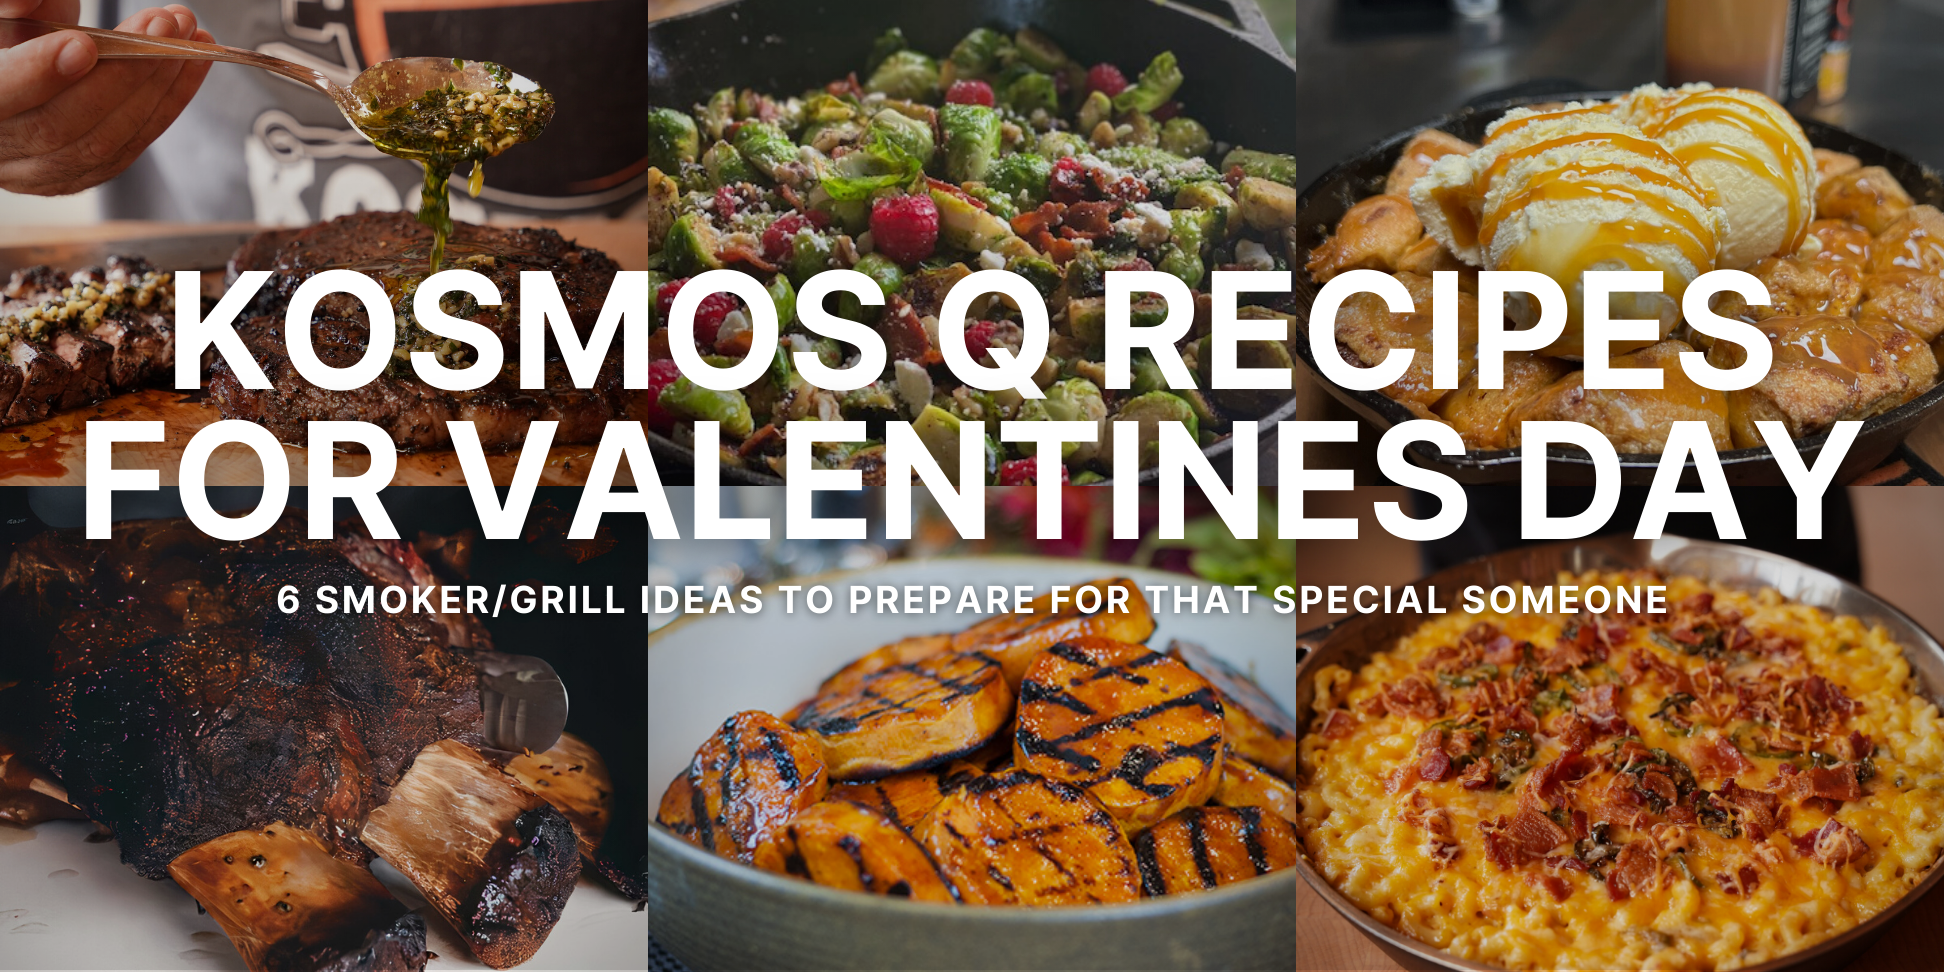 Kosmos Q Recipes for your Valentine's Day